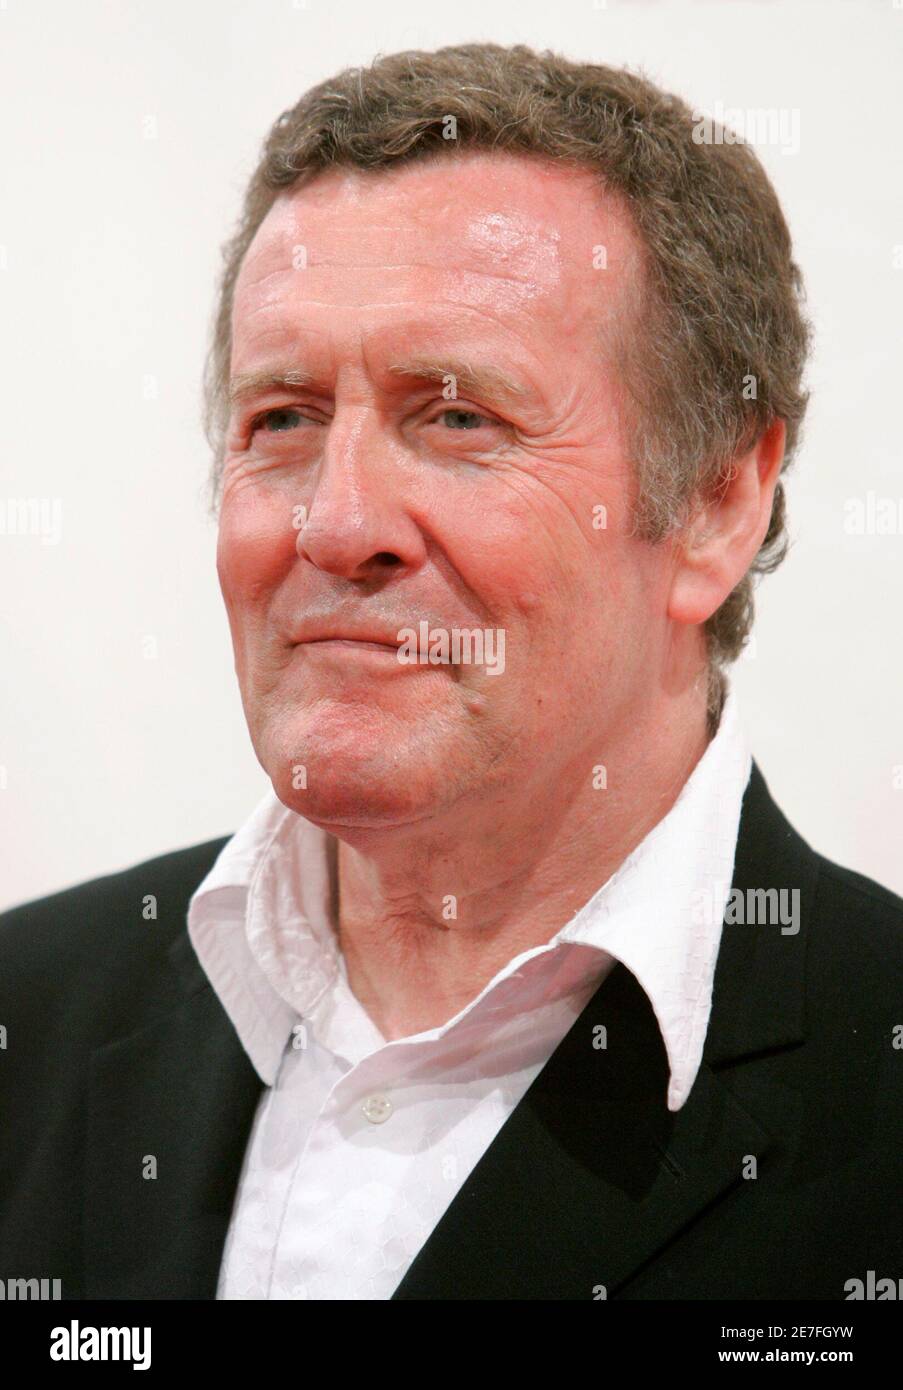 Musician Hamish Stuart, a member of Ringo's All Starr Band, arrives for the gala premiere of 'The Beatles LOVE by Cirque du Soleil' at the Mirage hotel and casino in Las Vegas, Nevada, June 30, 2006. [The show is a joint venture between The Beatles' company, Apple Corps Ltd., and Cirque du Soleil.] Stock Photo